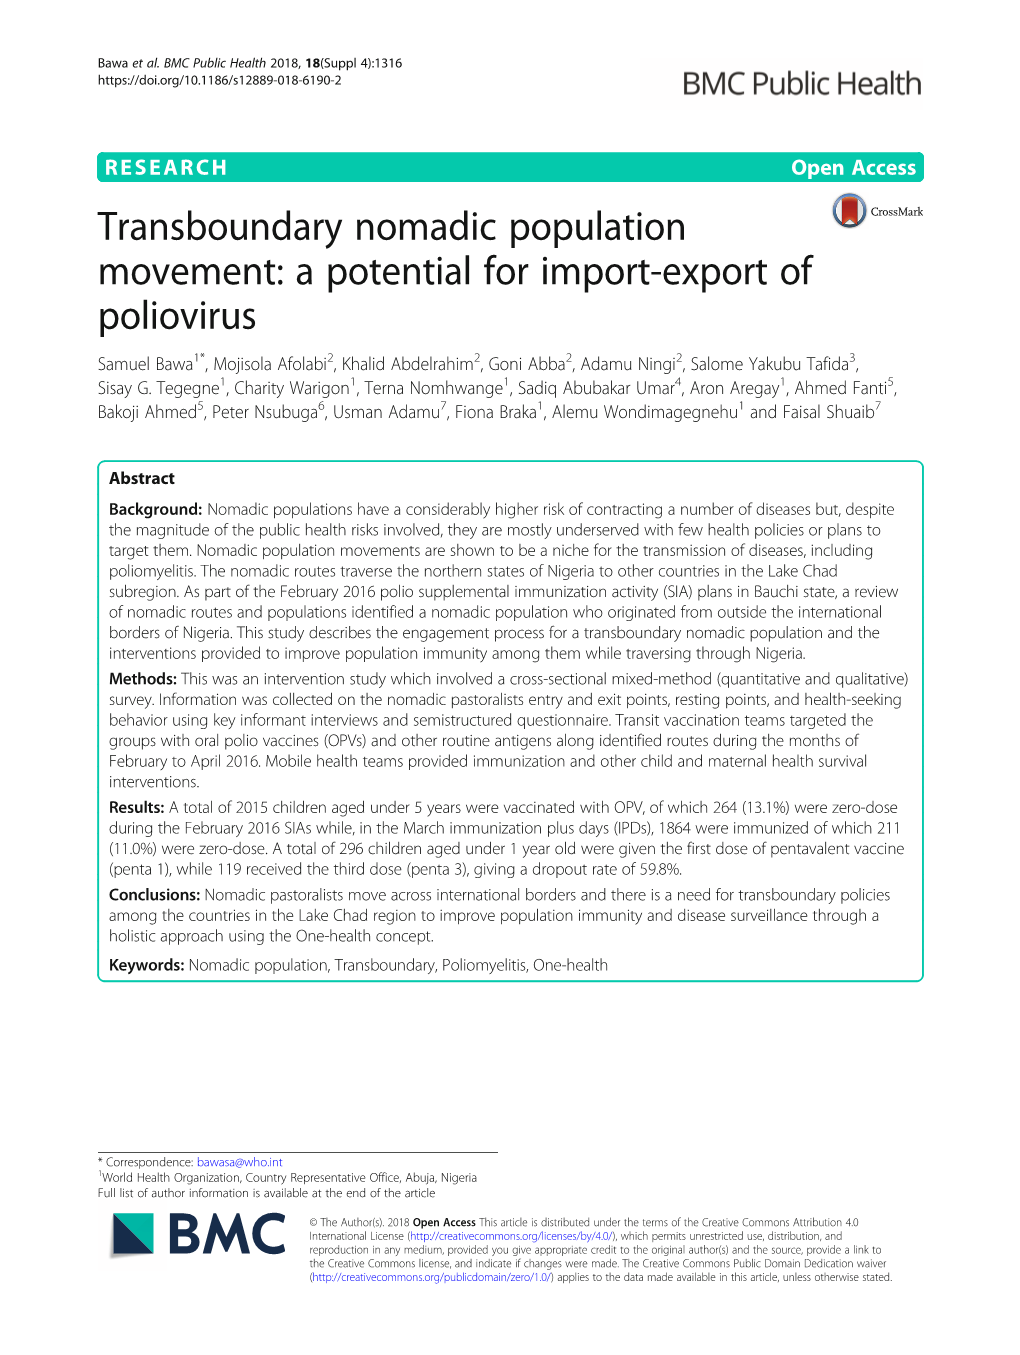 Transboundary Nomadic Population Movement: a Potential for Import